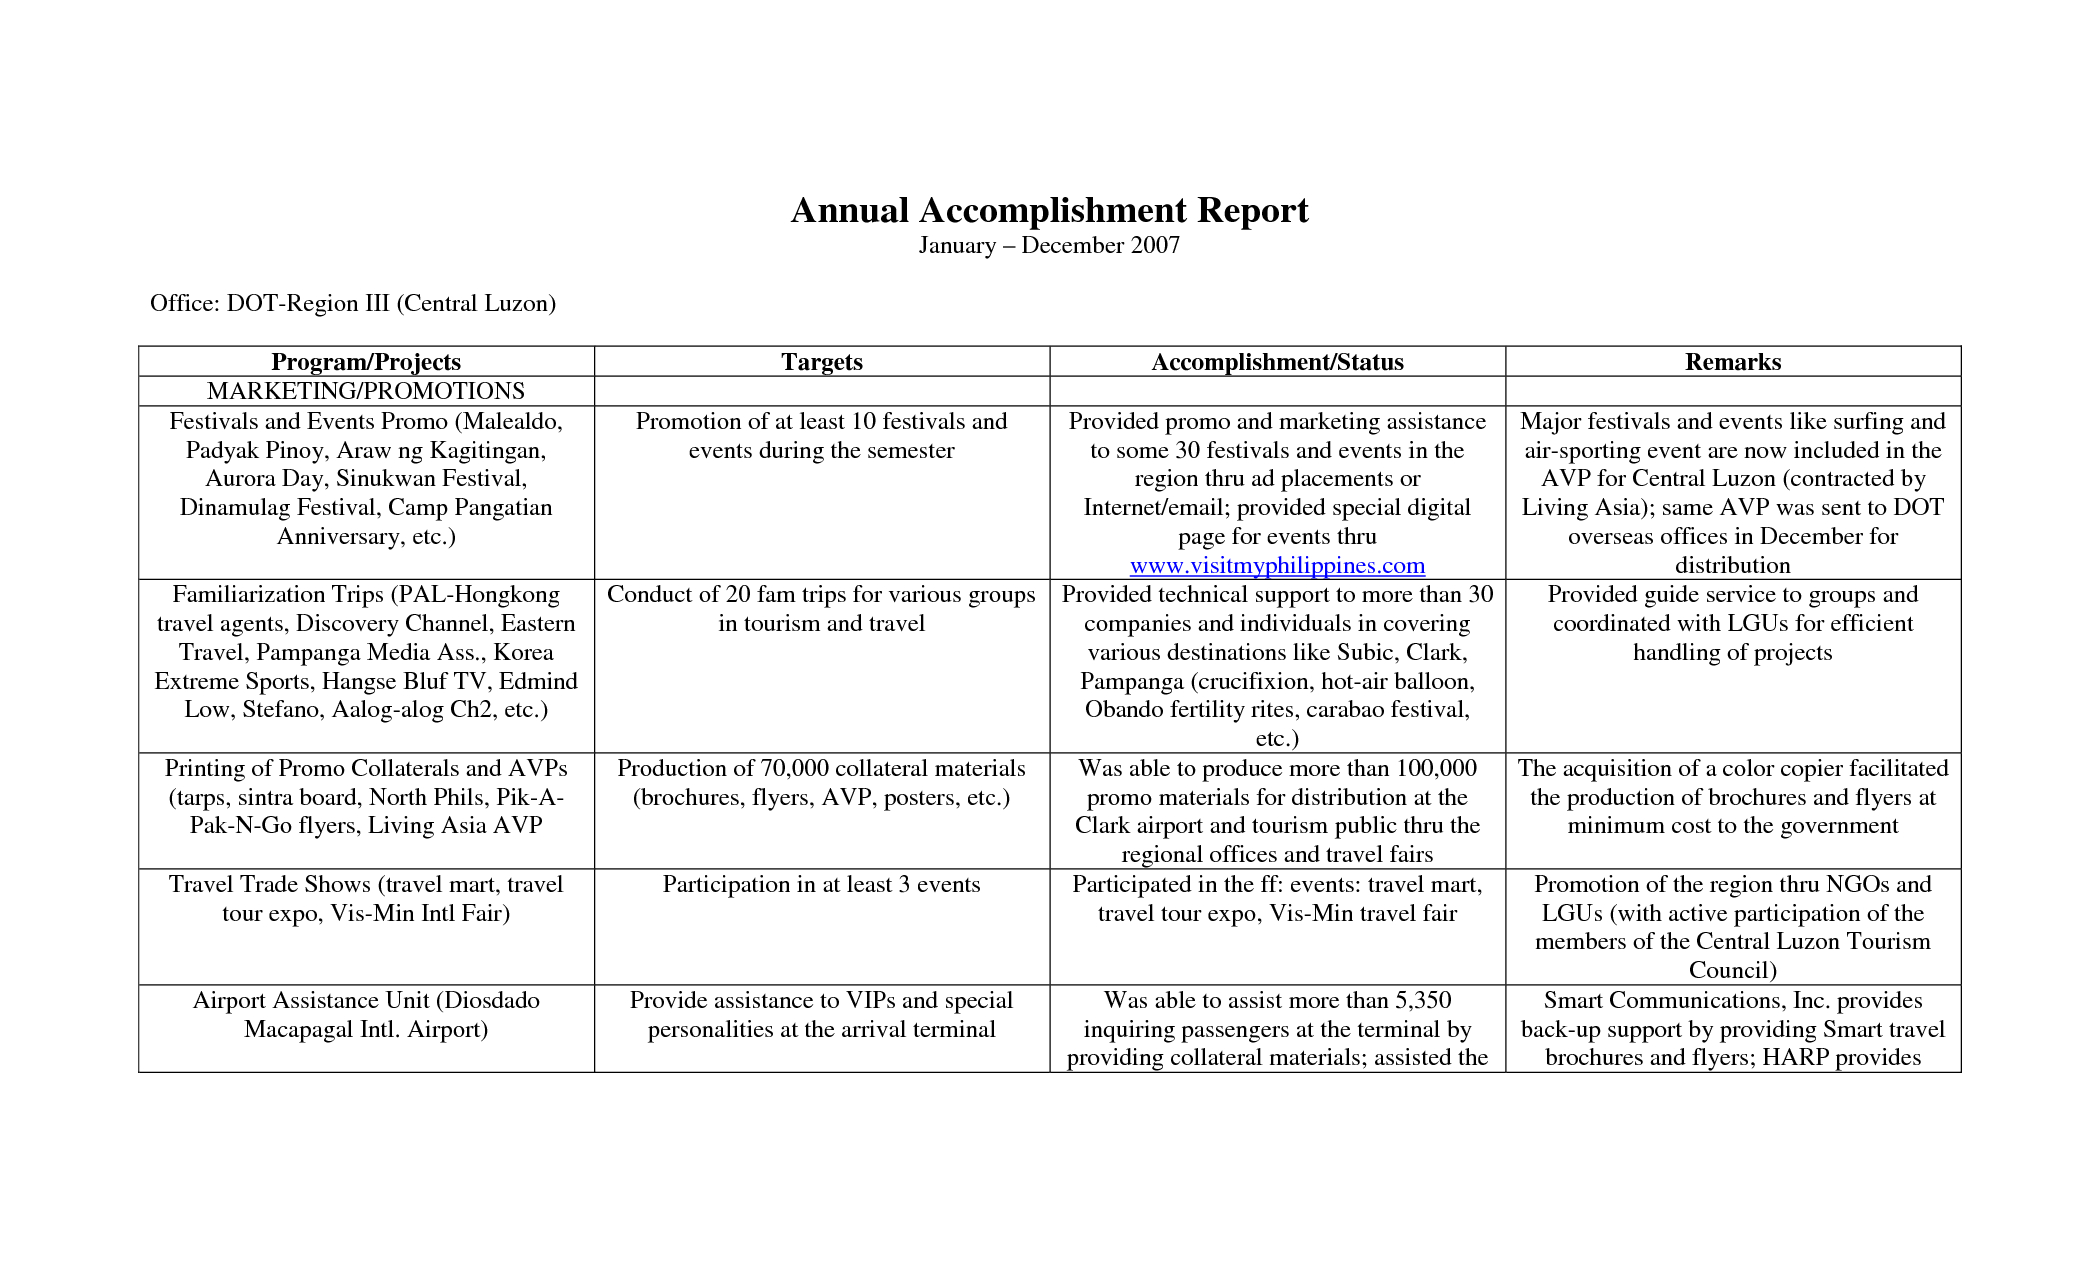 Terrific Annual Accomplishment Report Sample : V M D For Weekly Accomplishment Report Template